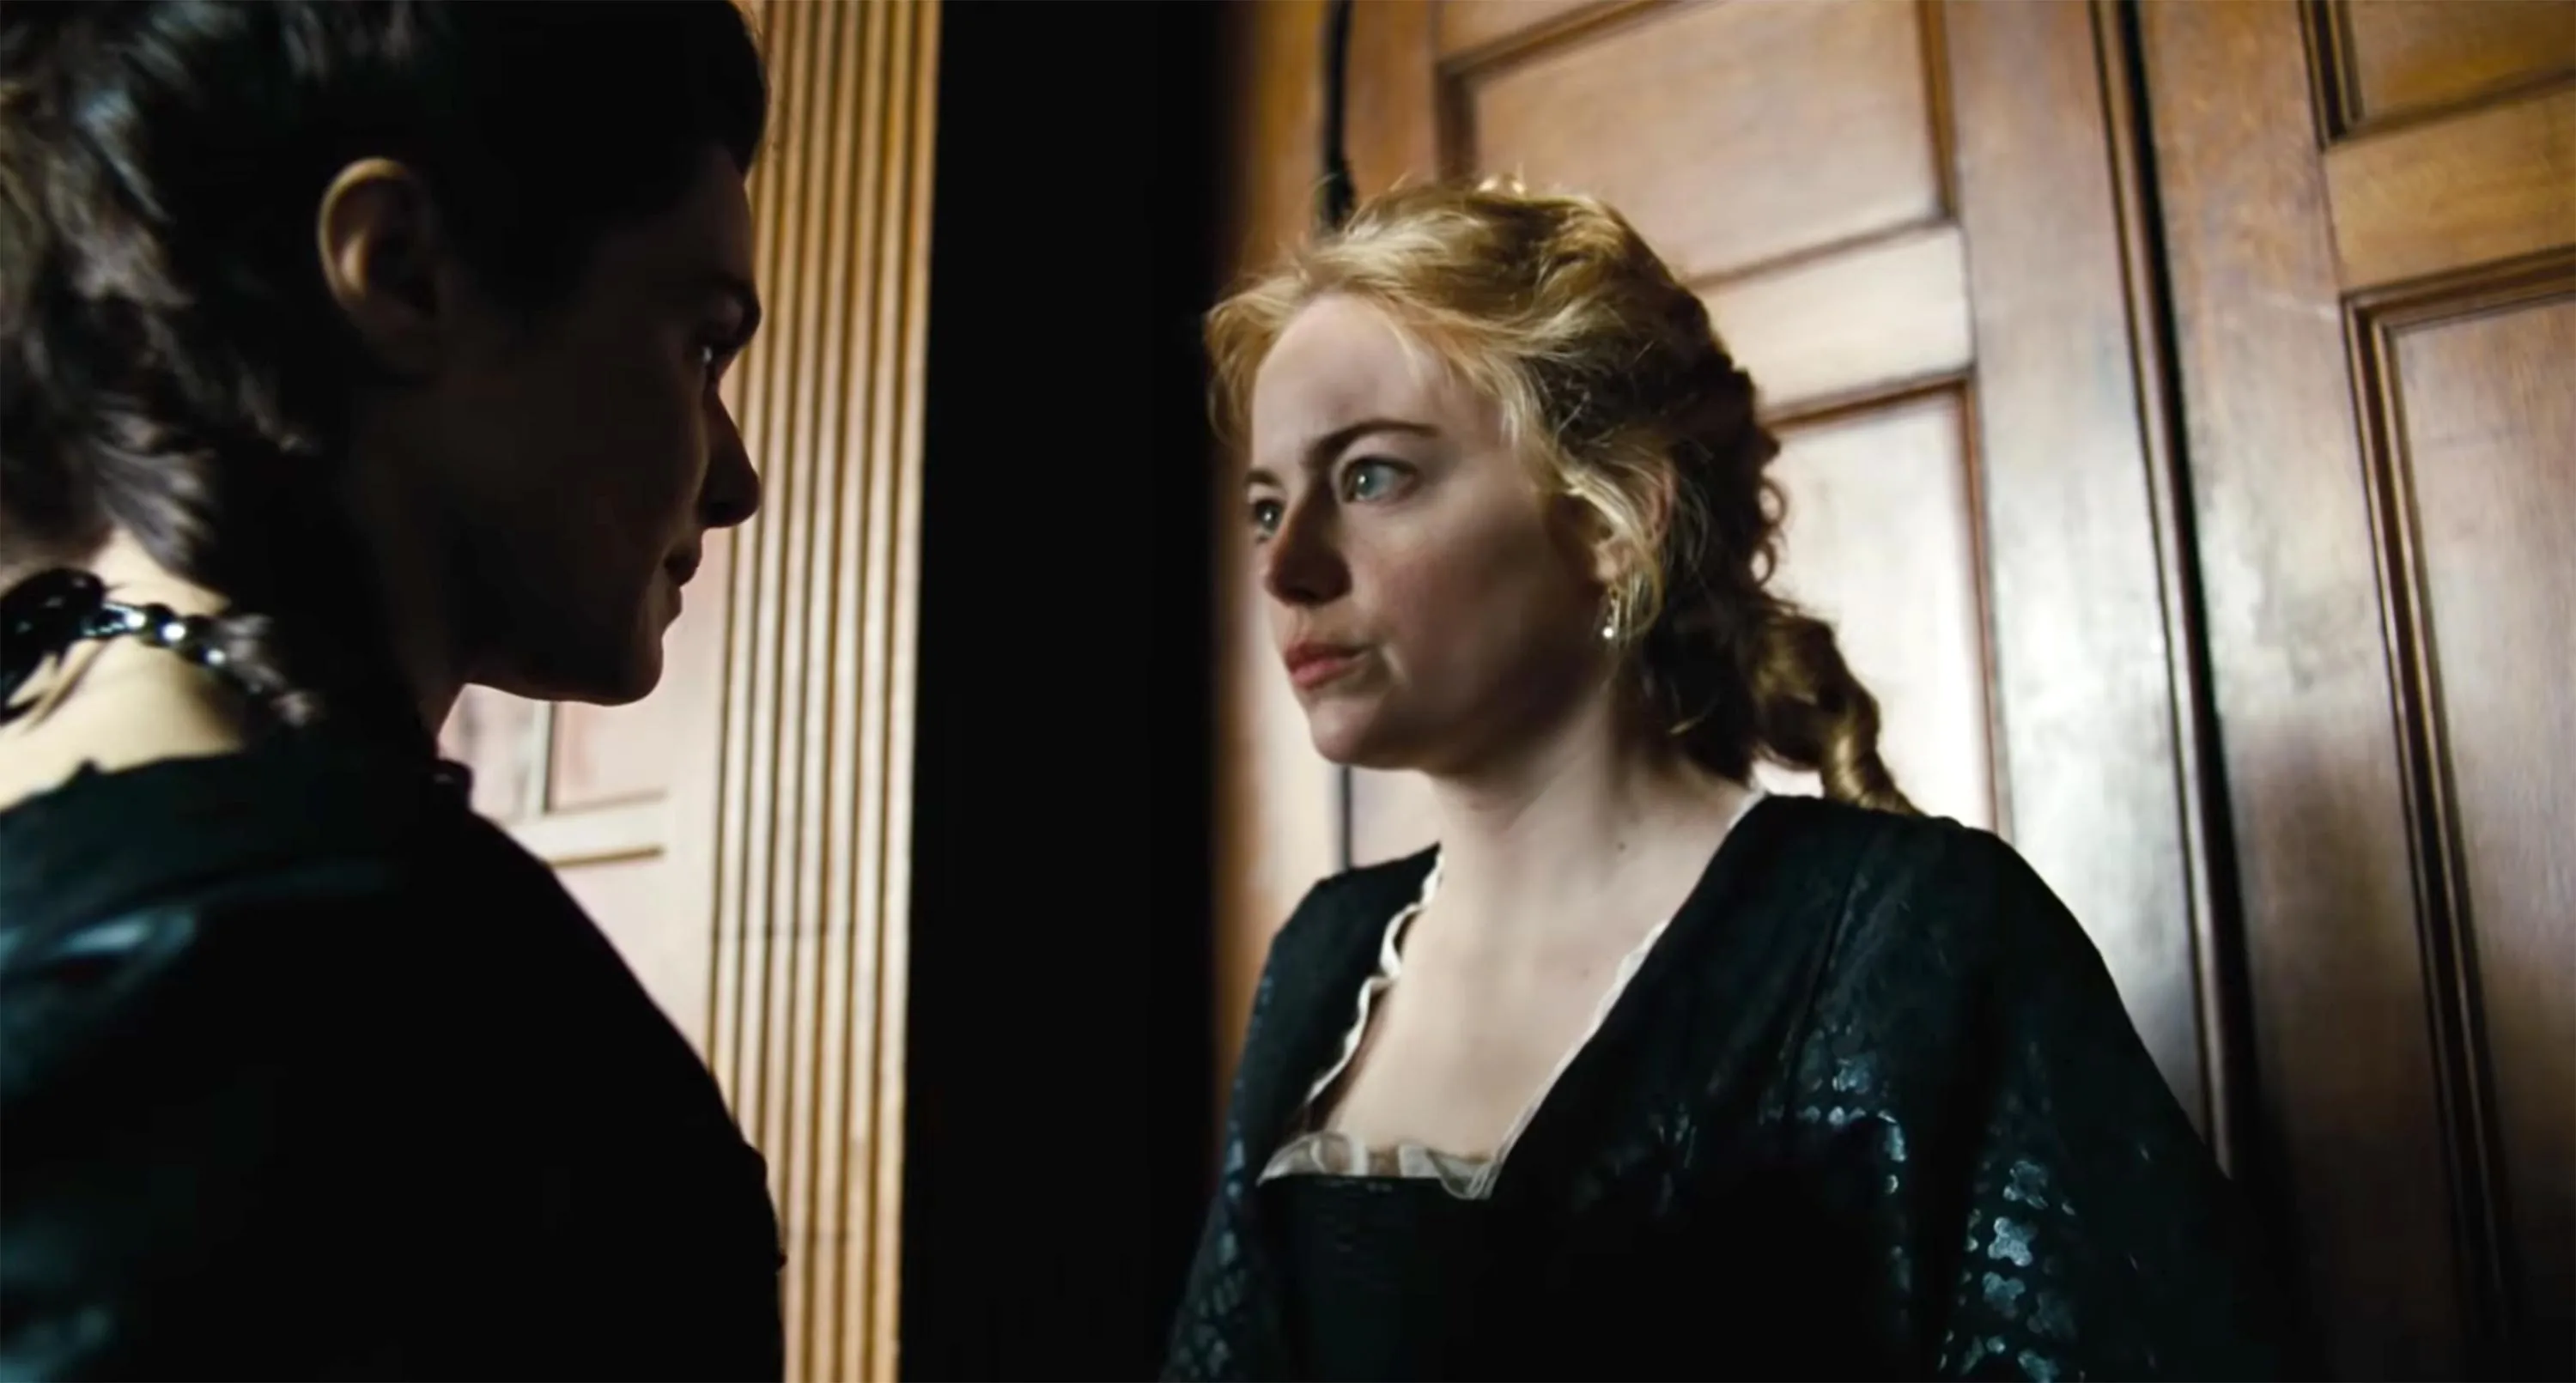 Emma Stone insisted on being naked in lesbian film The Favourite | PinkNews